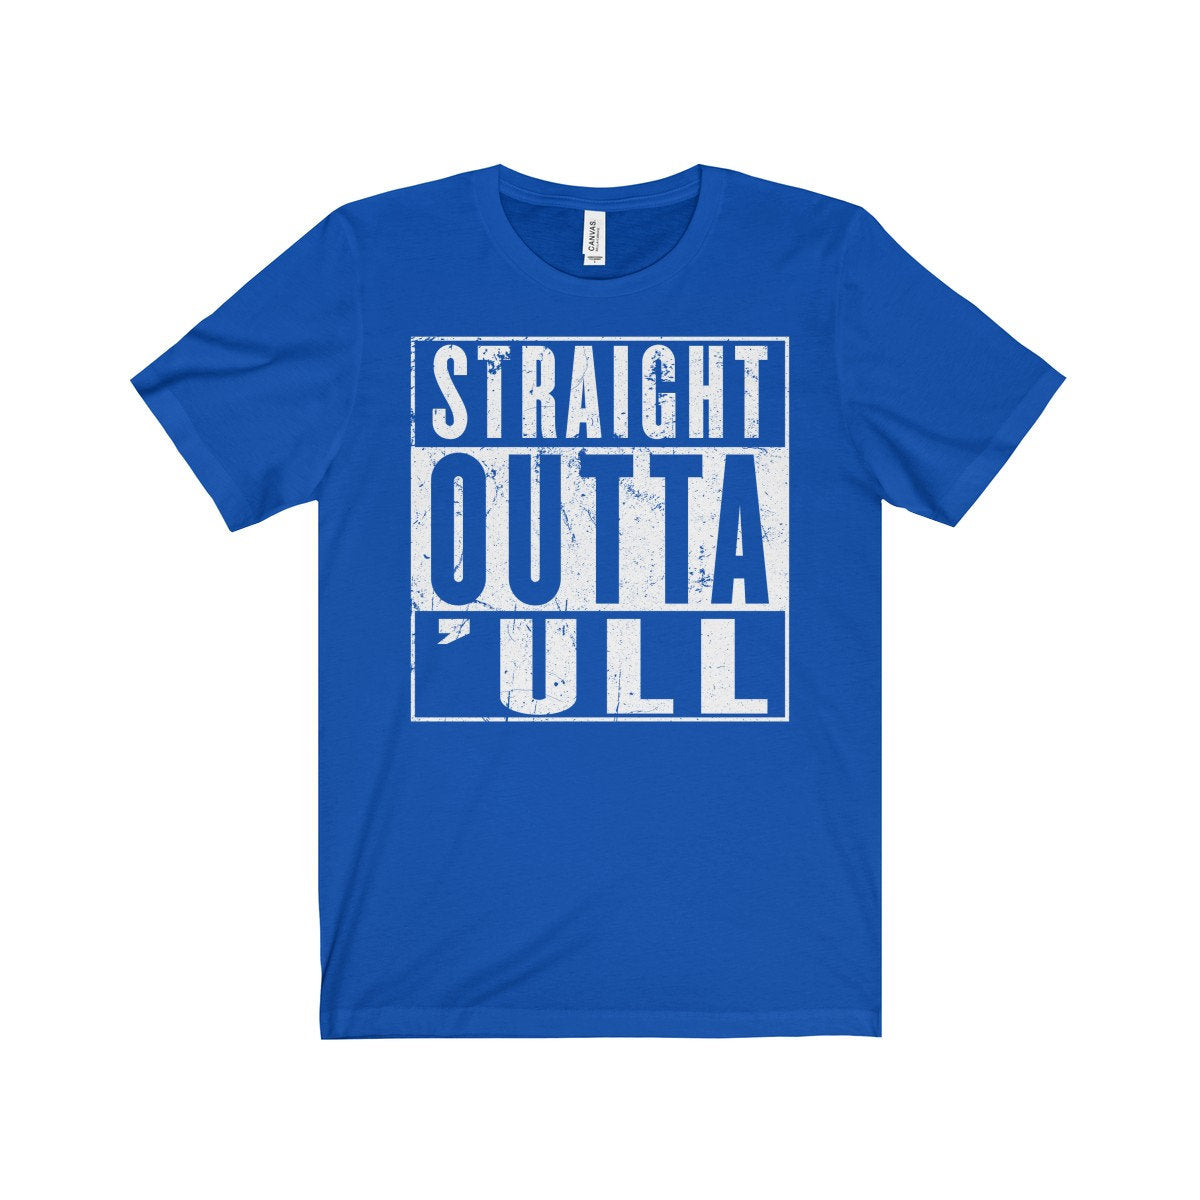 Funny Hull T-Shirt, Straight Outta &#39;ull (Hull) White Funny Compton NWA Style Unisex Jersey Short Sleeve Tee Shirt Top